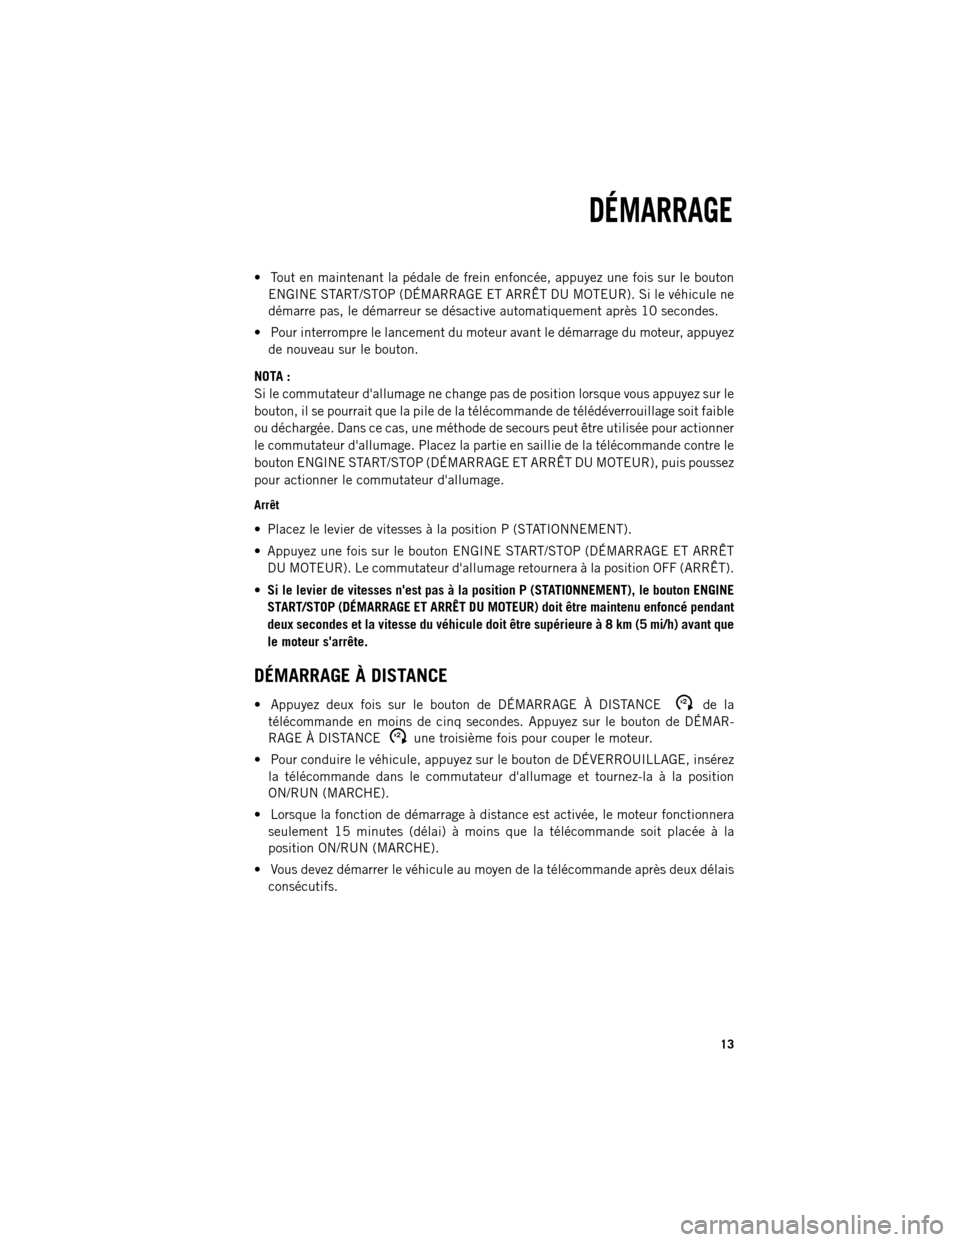 Ram 1500 2013  Guide dutilisateur (in French)  Tout en maintenant la pédale de frein enfoncée, appuyez une fois sur le bouton
ENGINE START/STOP (DÉMARRAGE ET ARRÊT DU MOTEUR). Si le véhicule ne
démarre pas, le démarreur se désactive auto